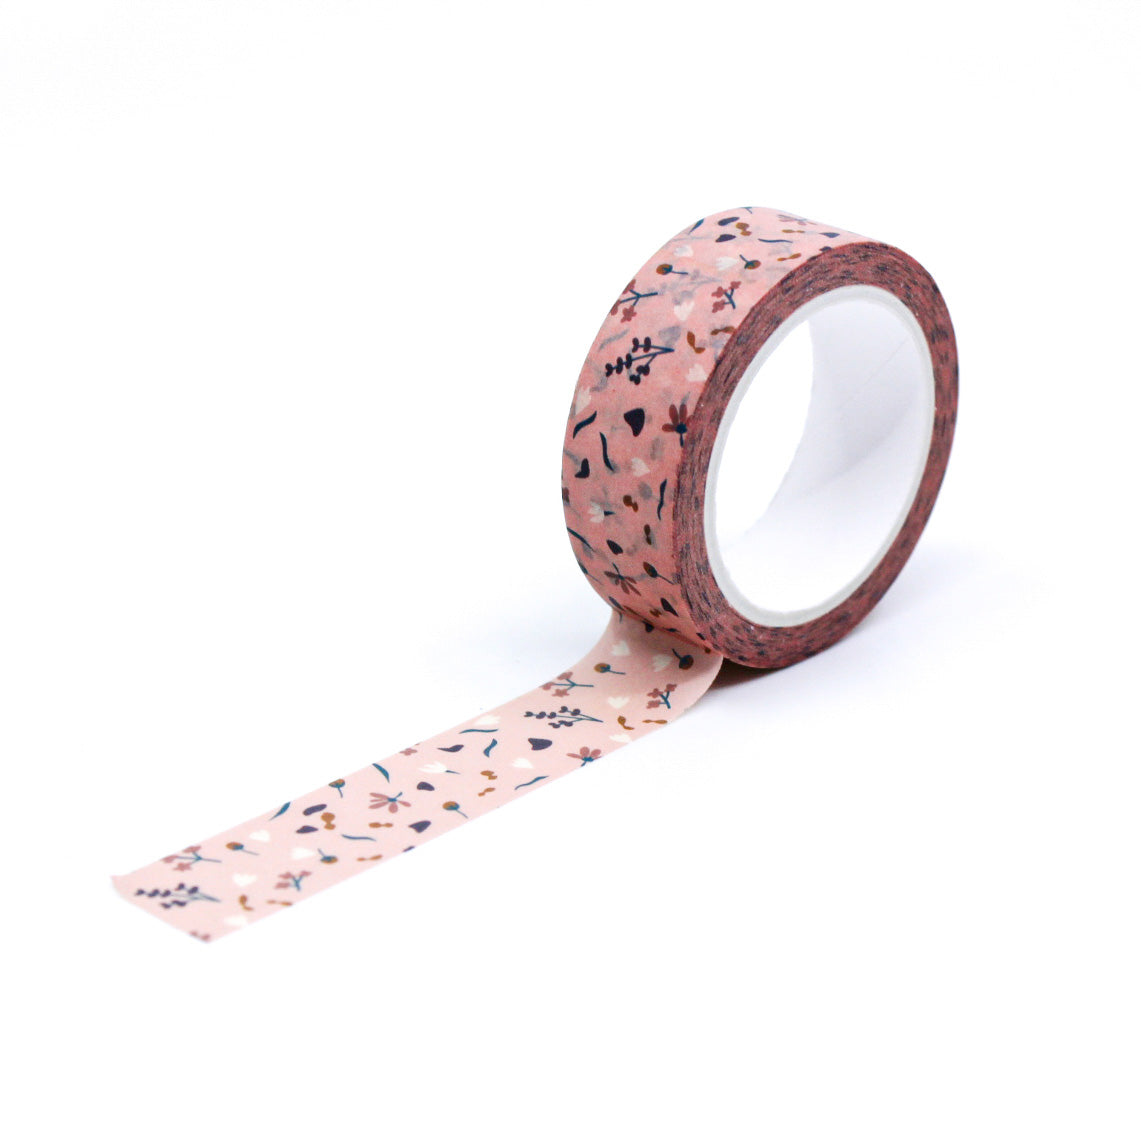 Enhance your crafts with our Pink Sachet Floral Washi Tape, featuring a delicate floral pattern in shades of pink. Ideal for adding a touch of elegance and femininity to your projects. this tape is from Maylay Co. and sold at BBB Supplies Craft Shop.